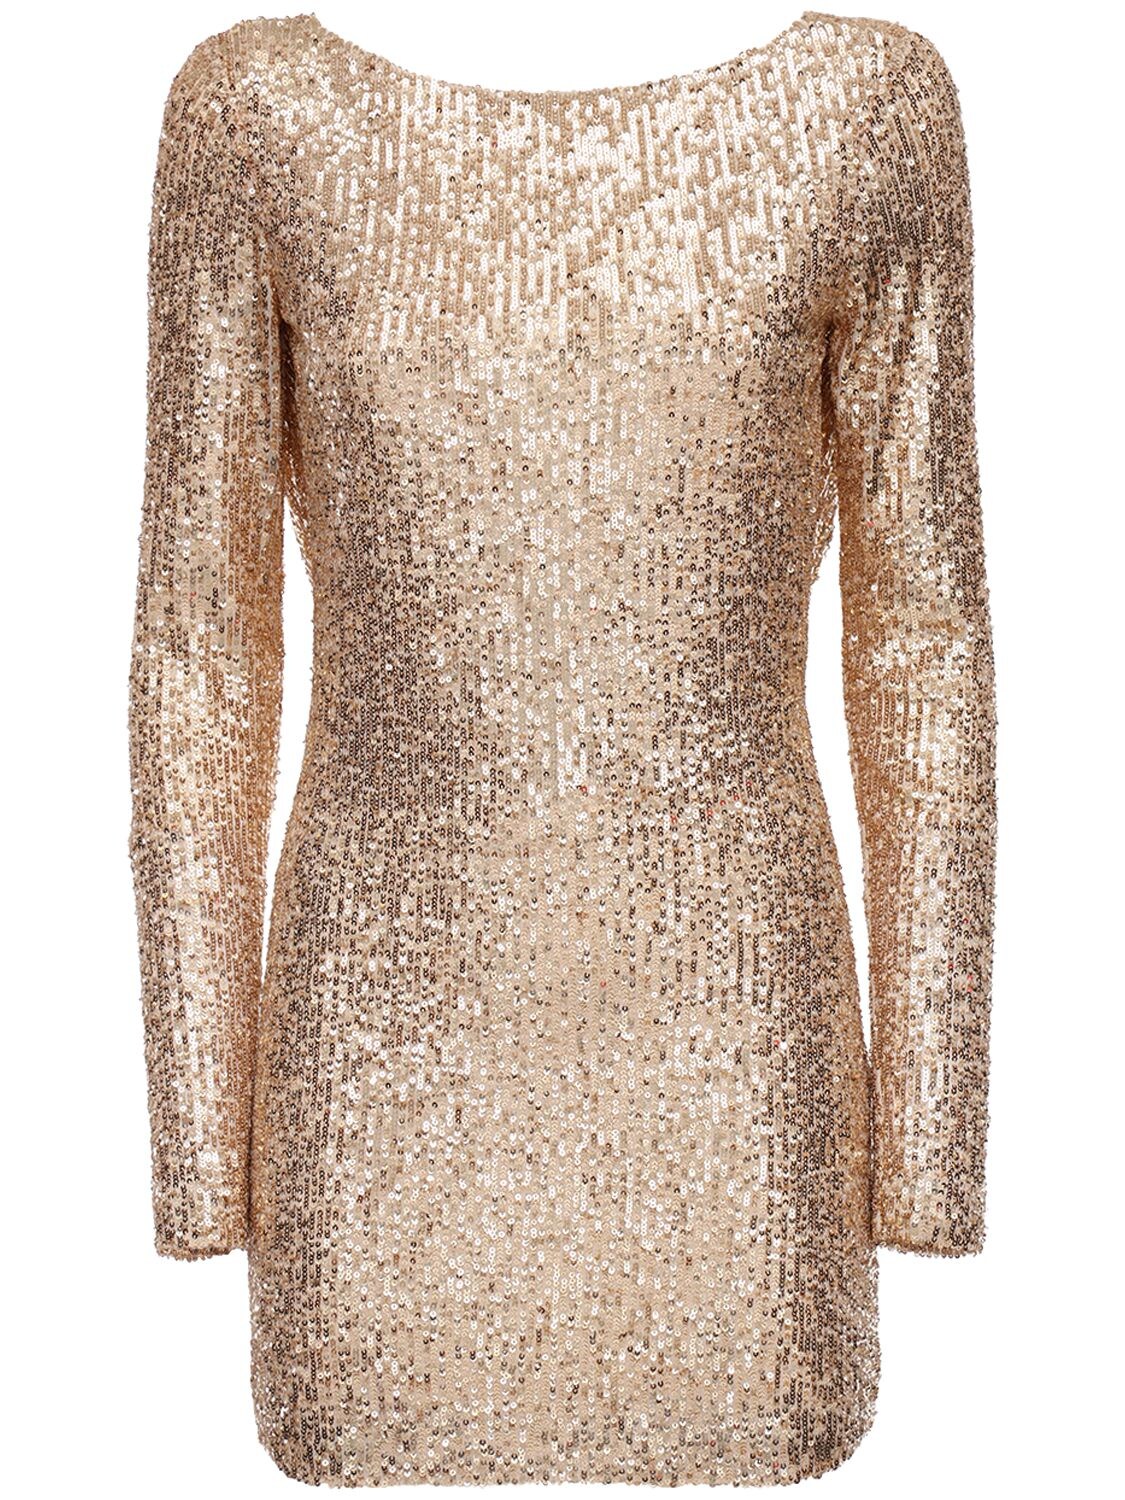 IN THE MOOD FOR LOVE MOSS SEQUINED MINI DRESS,72IXKL001-MDAWNA2